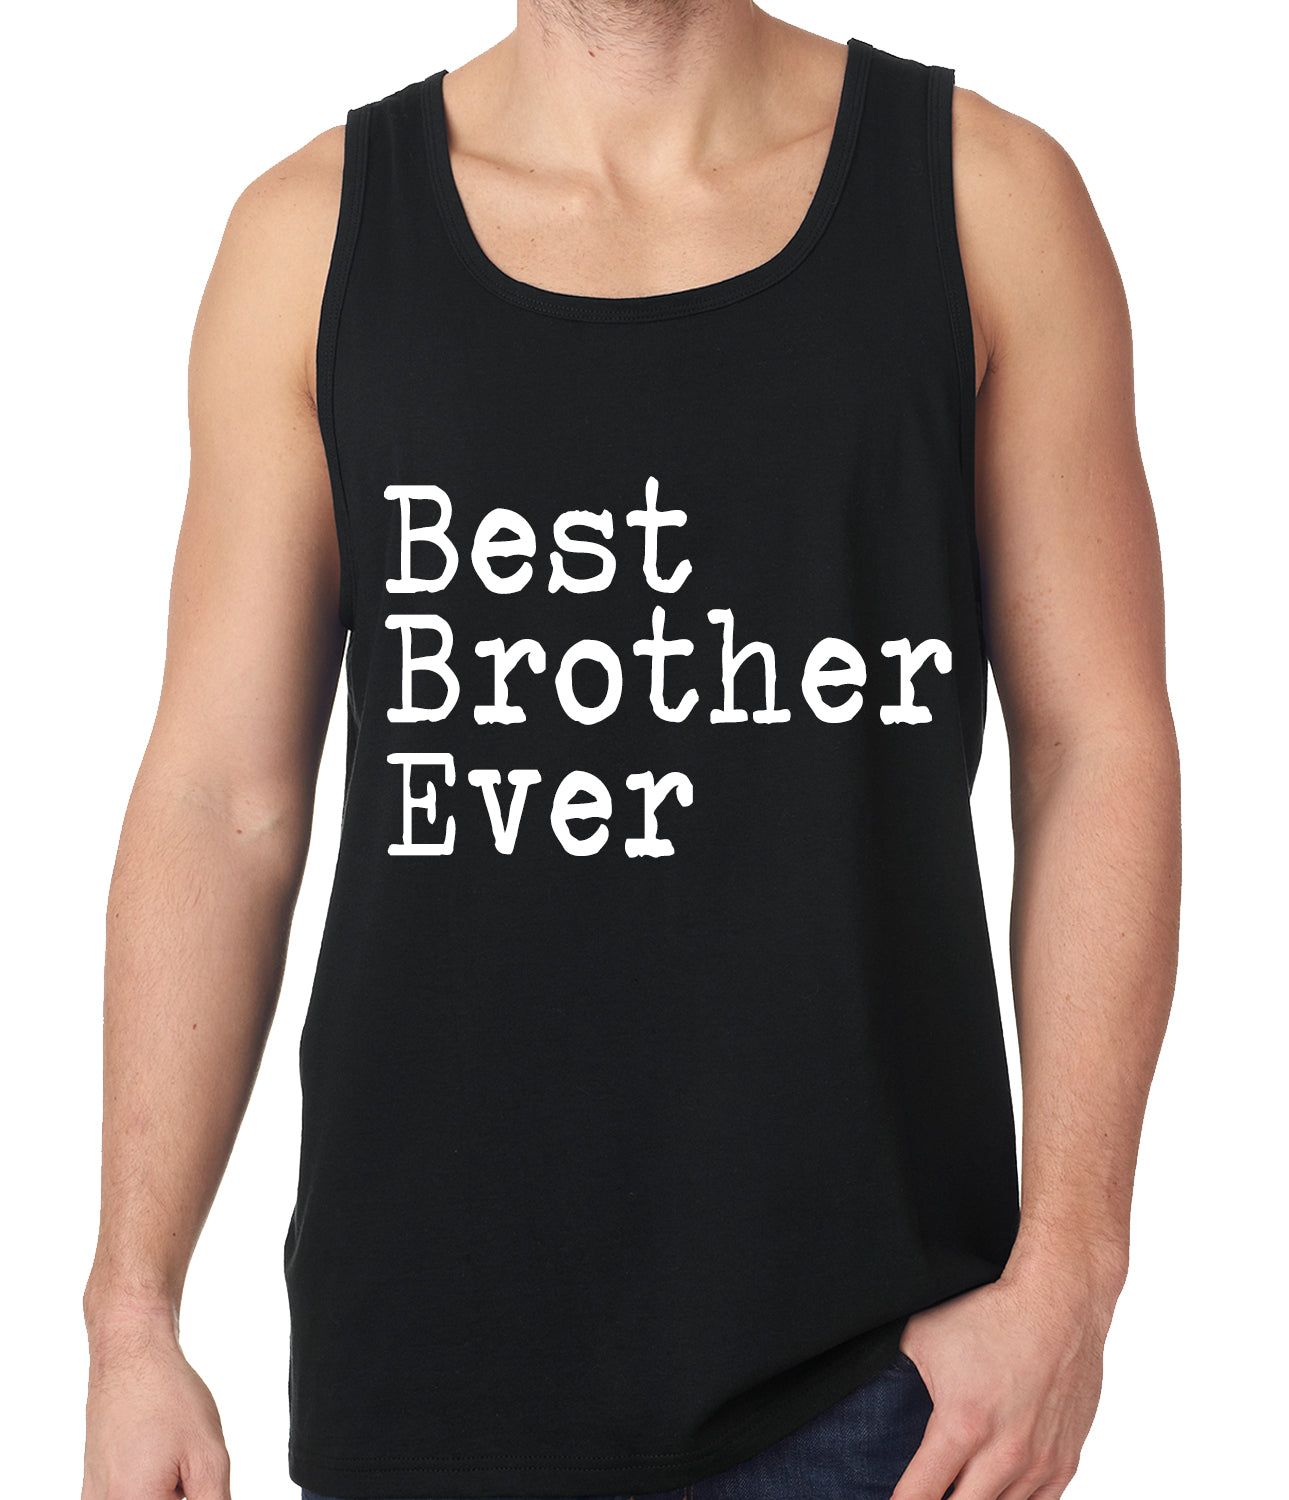 Best Brother Ever Tank Top